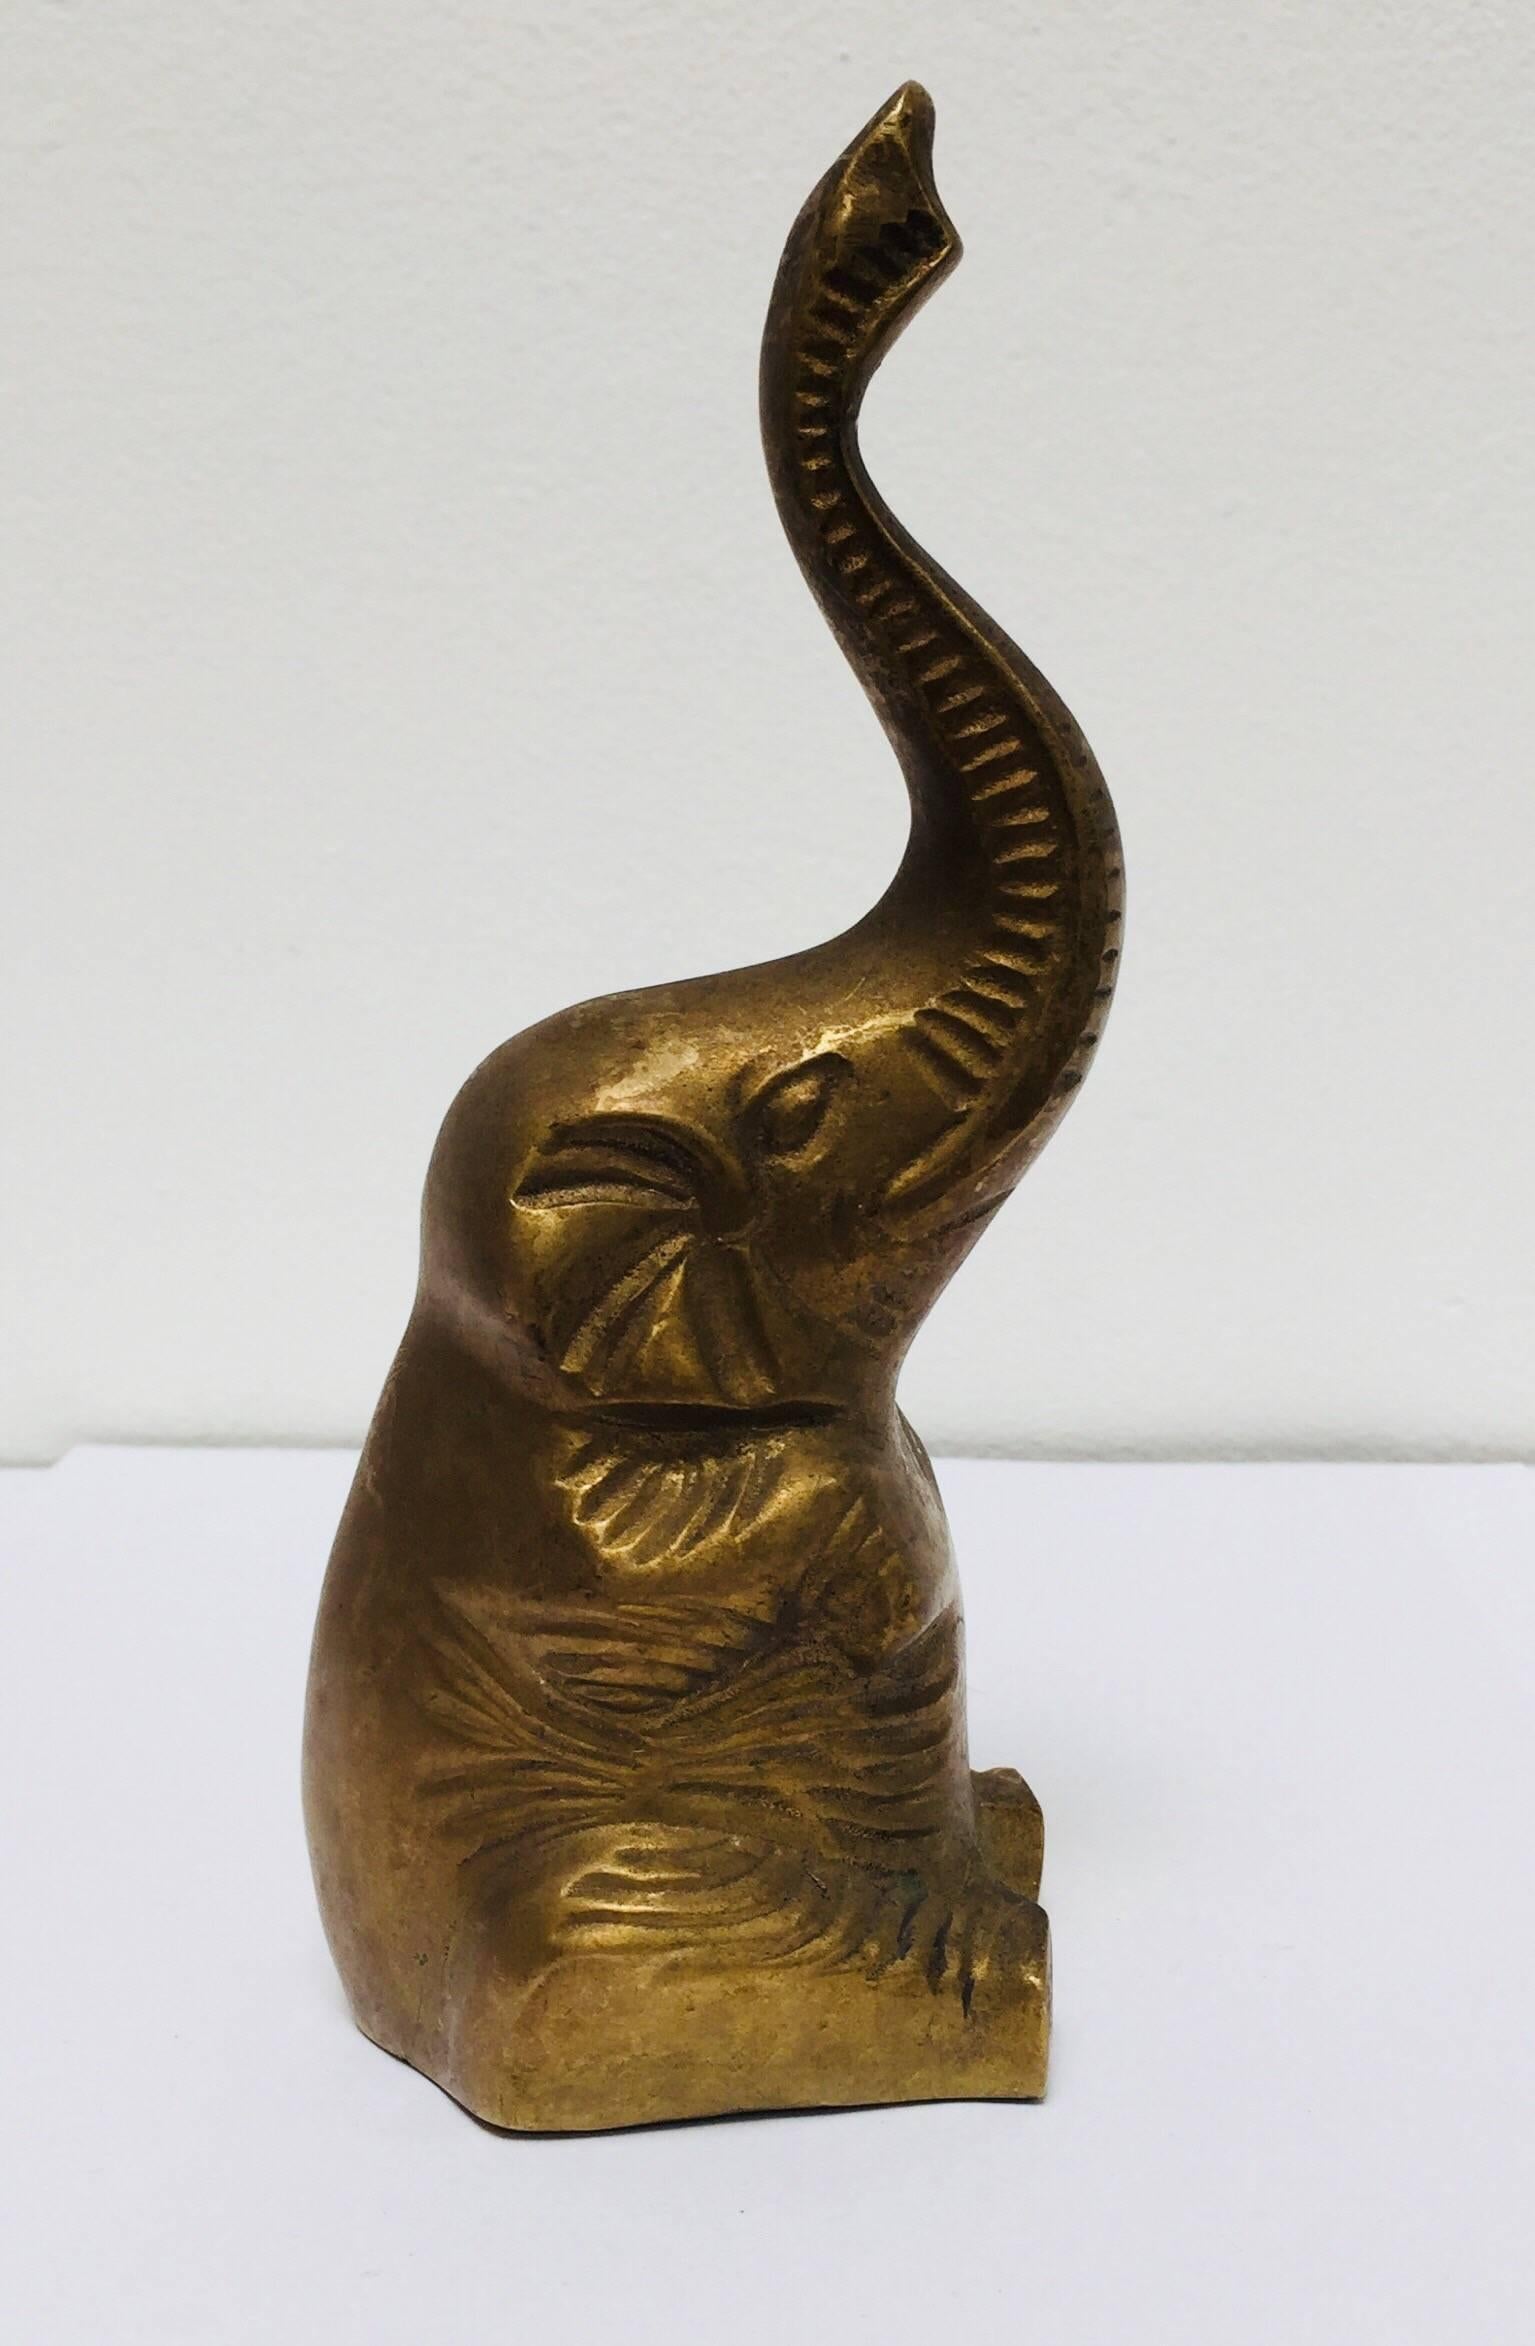 Vintage cast solid polished brass elephant sculpture paper weight.
The elephant is seated and a trunk is up for good luck. 
Lots of detail on the front and sides of the elephant.
Dimensions: 2.75